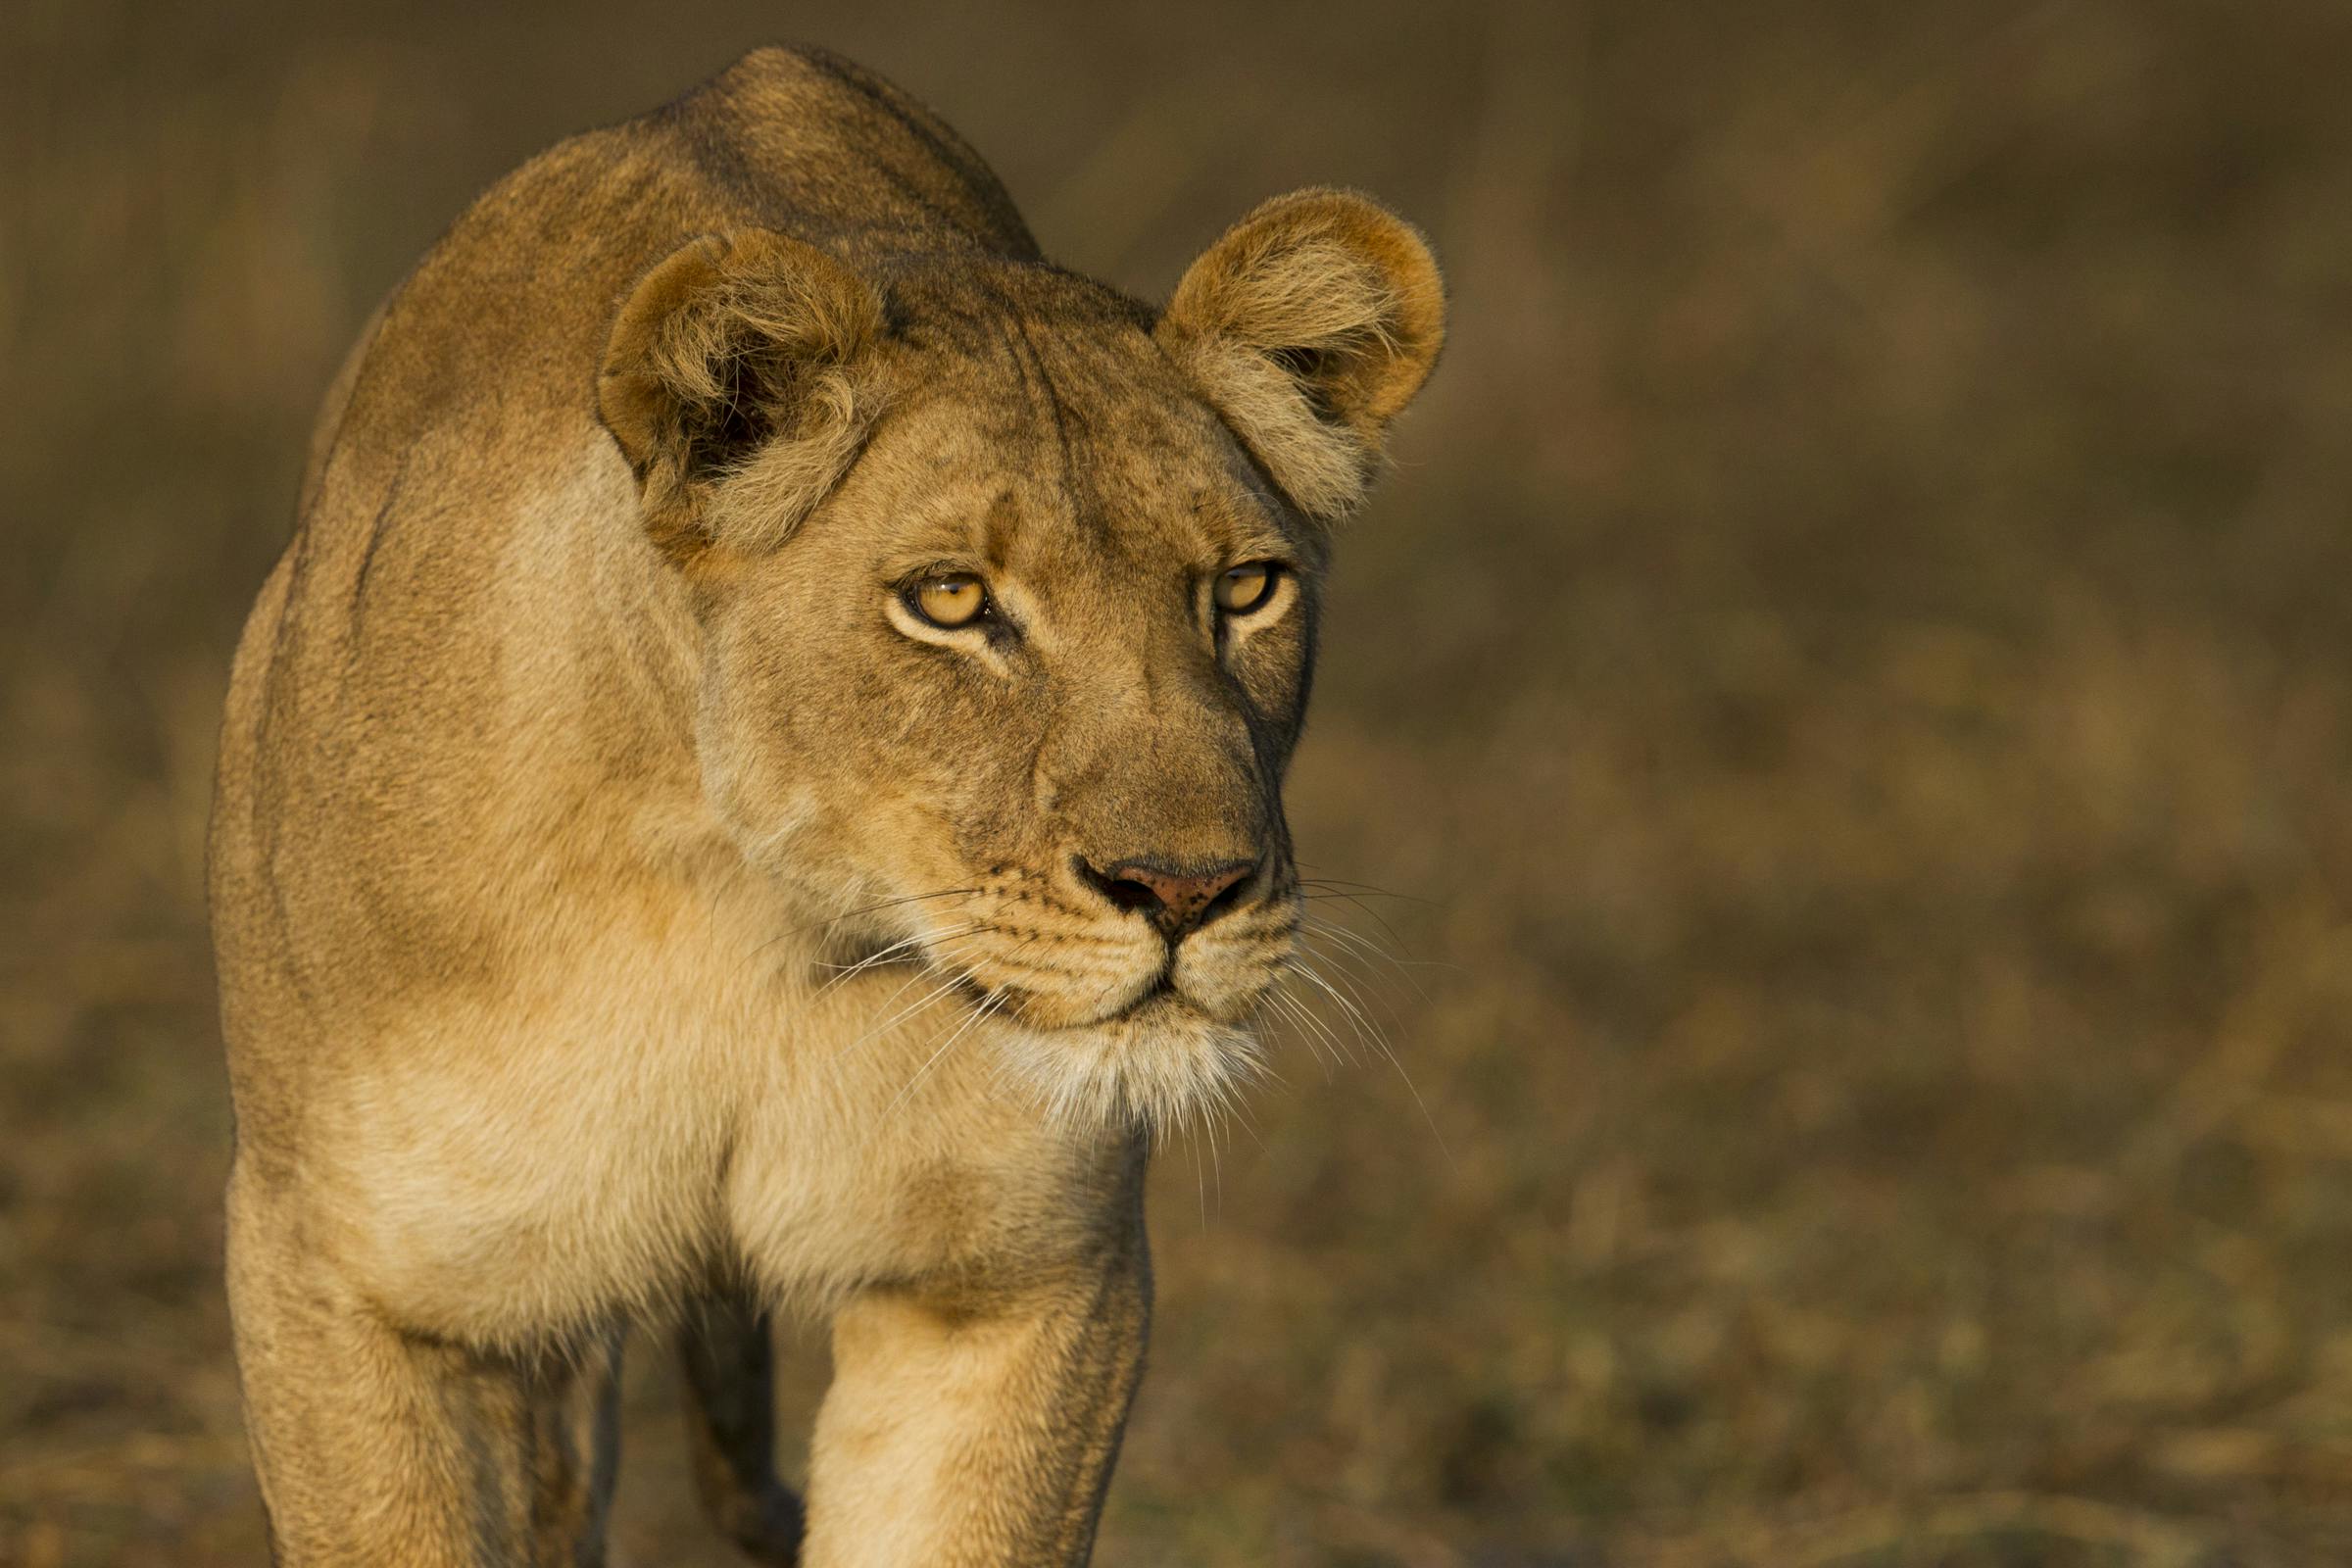 Recovering West African Lion Populations